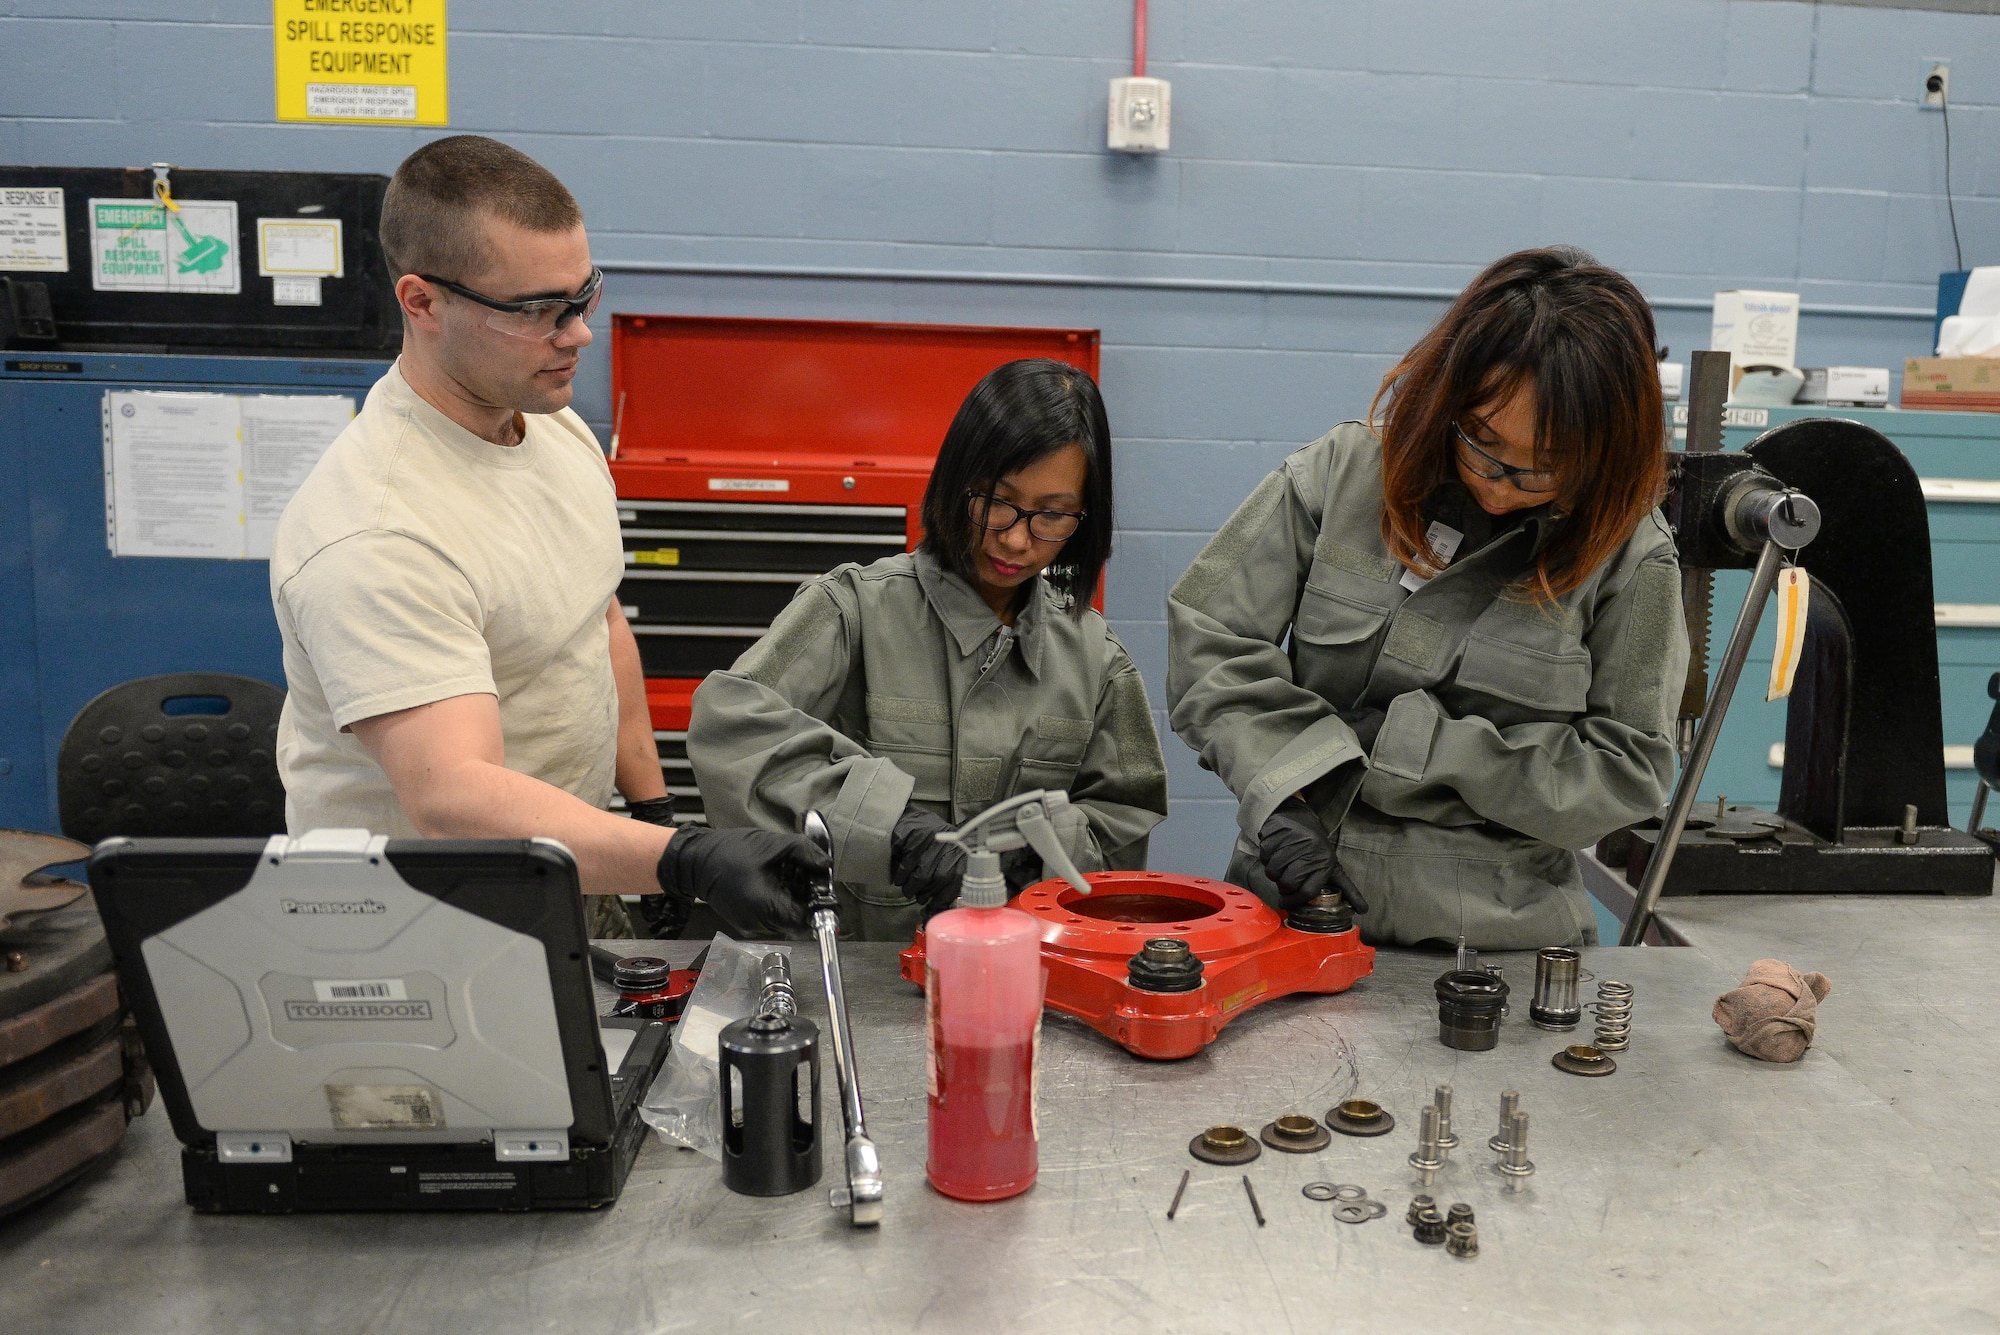 Airman 1st Class Kameron Hamilton, 55th Maintenance Squadron hydraulics system journeyman, shows 55th MXS spouses how to work on an RC-135 break assembly part in the Bennie L. Davis Maintenance Facility at Offutt Air Force Base, Neb., Feb. 17, 2017. The tour began with a briefing followed by a tour of all the shops in the maintenance facility and ended with an aircraft tour. (U.S. Air Force photo by Zachary Hada)